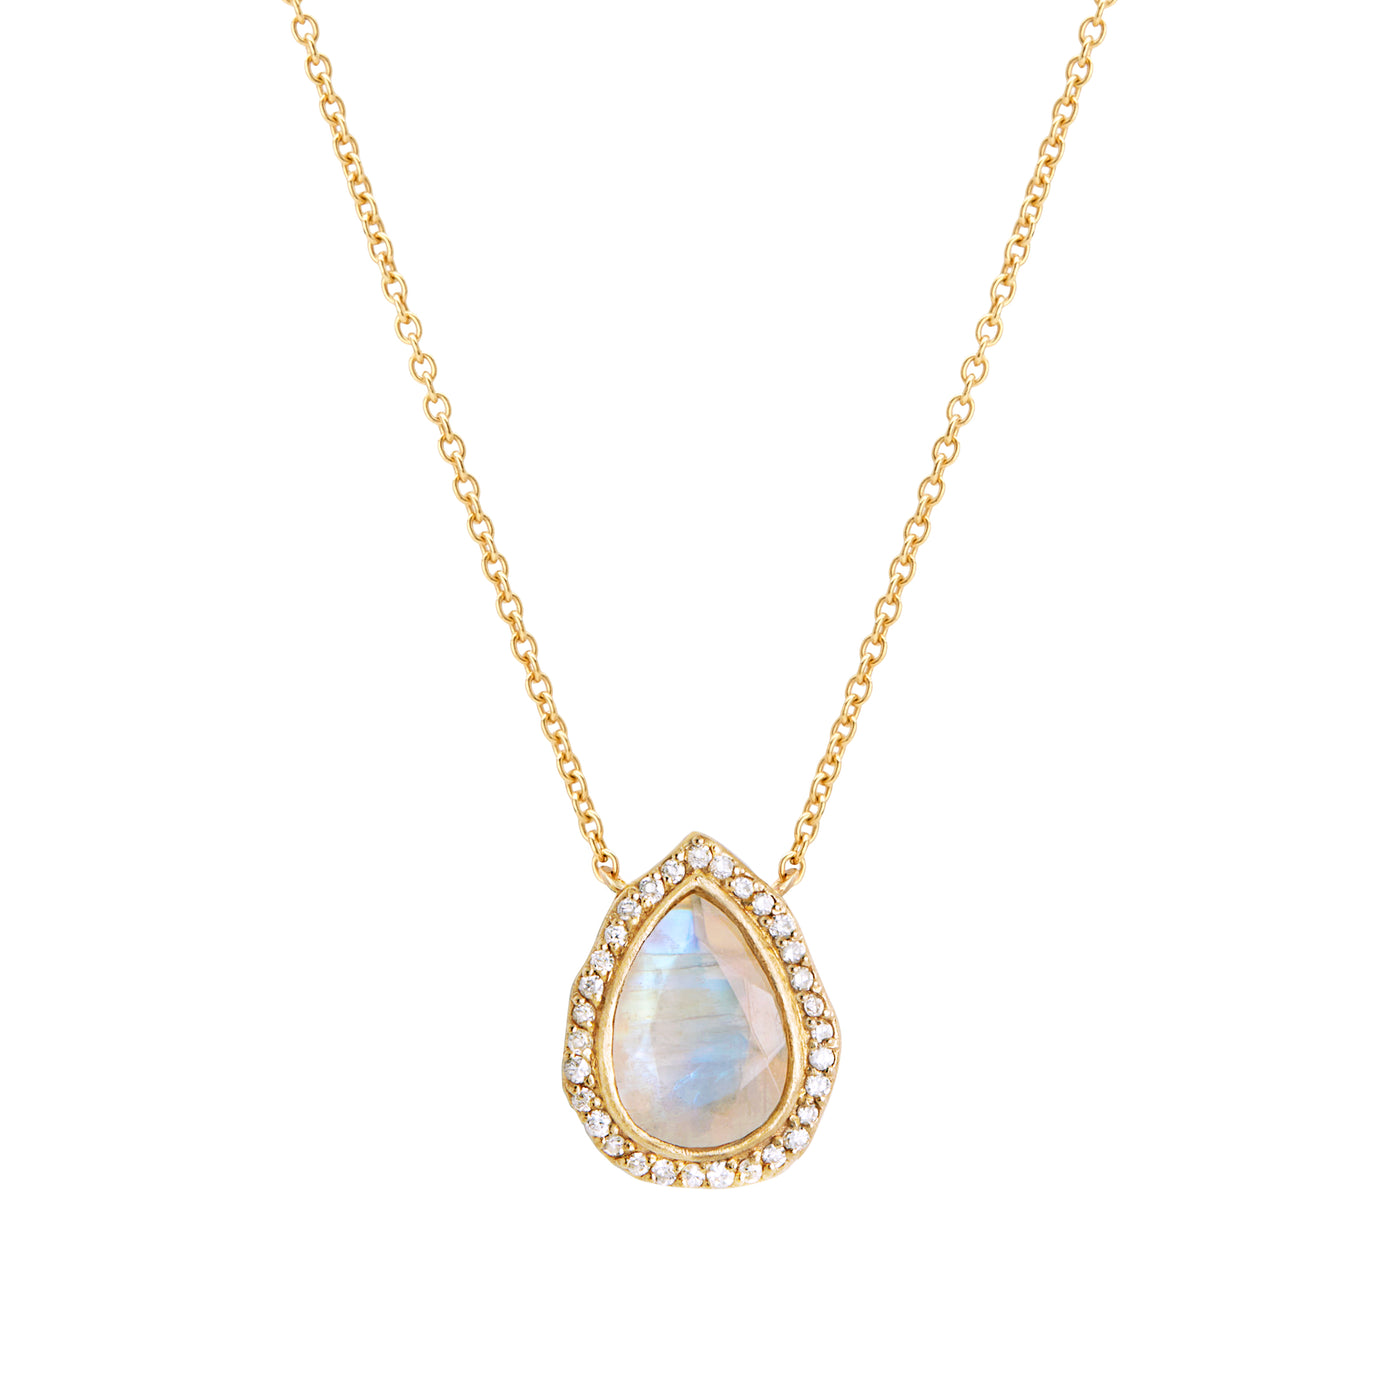 14 Karat Yellow Gold Necklace with Pear Shaped Moonstone Stone with Halo of White Diamonds Against White Background